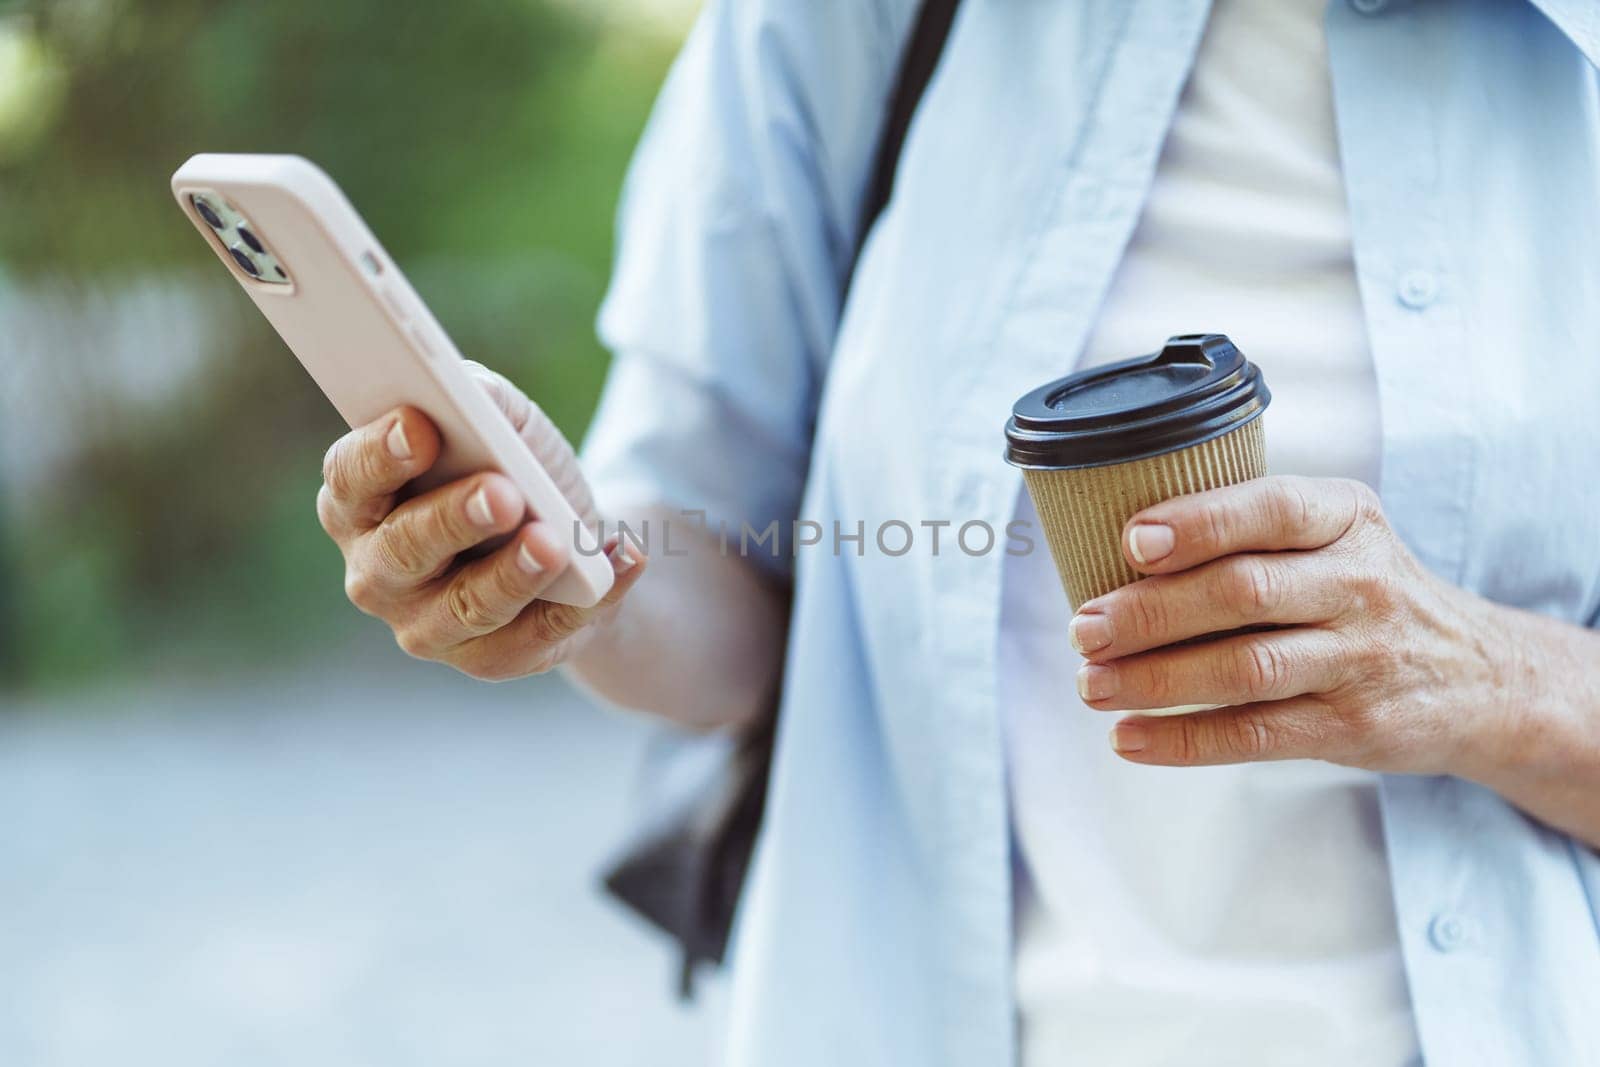 Cup of coffee alongside smartphone, symbolizing combination of digital communication and pleasure of coffee consumption. Coffee and mobile communication on internet concept. High quality photo